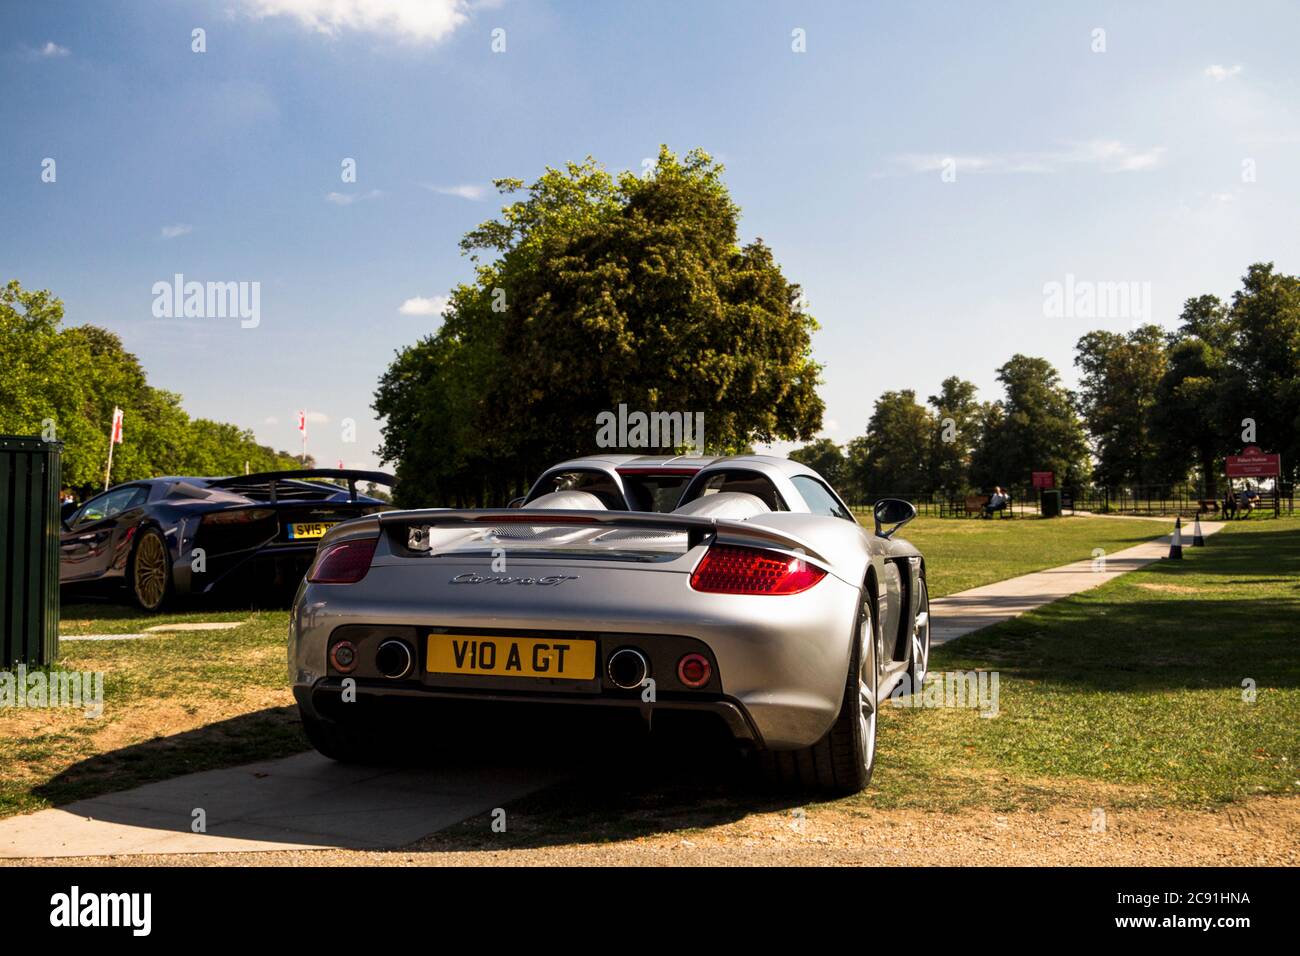 Silver Porsche Carrera GT modern supercar arriving to an annual automotive event held in Oxfordshire. Stock Photo